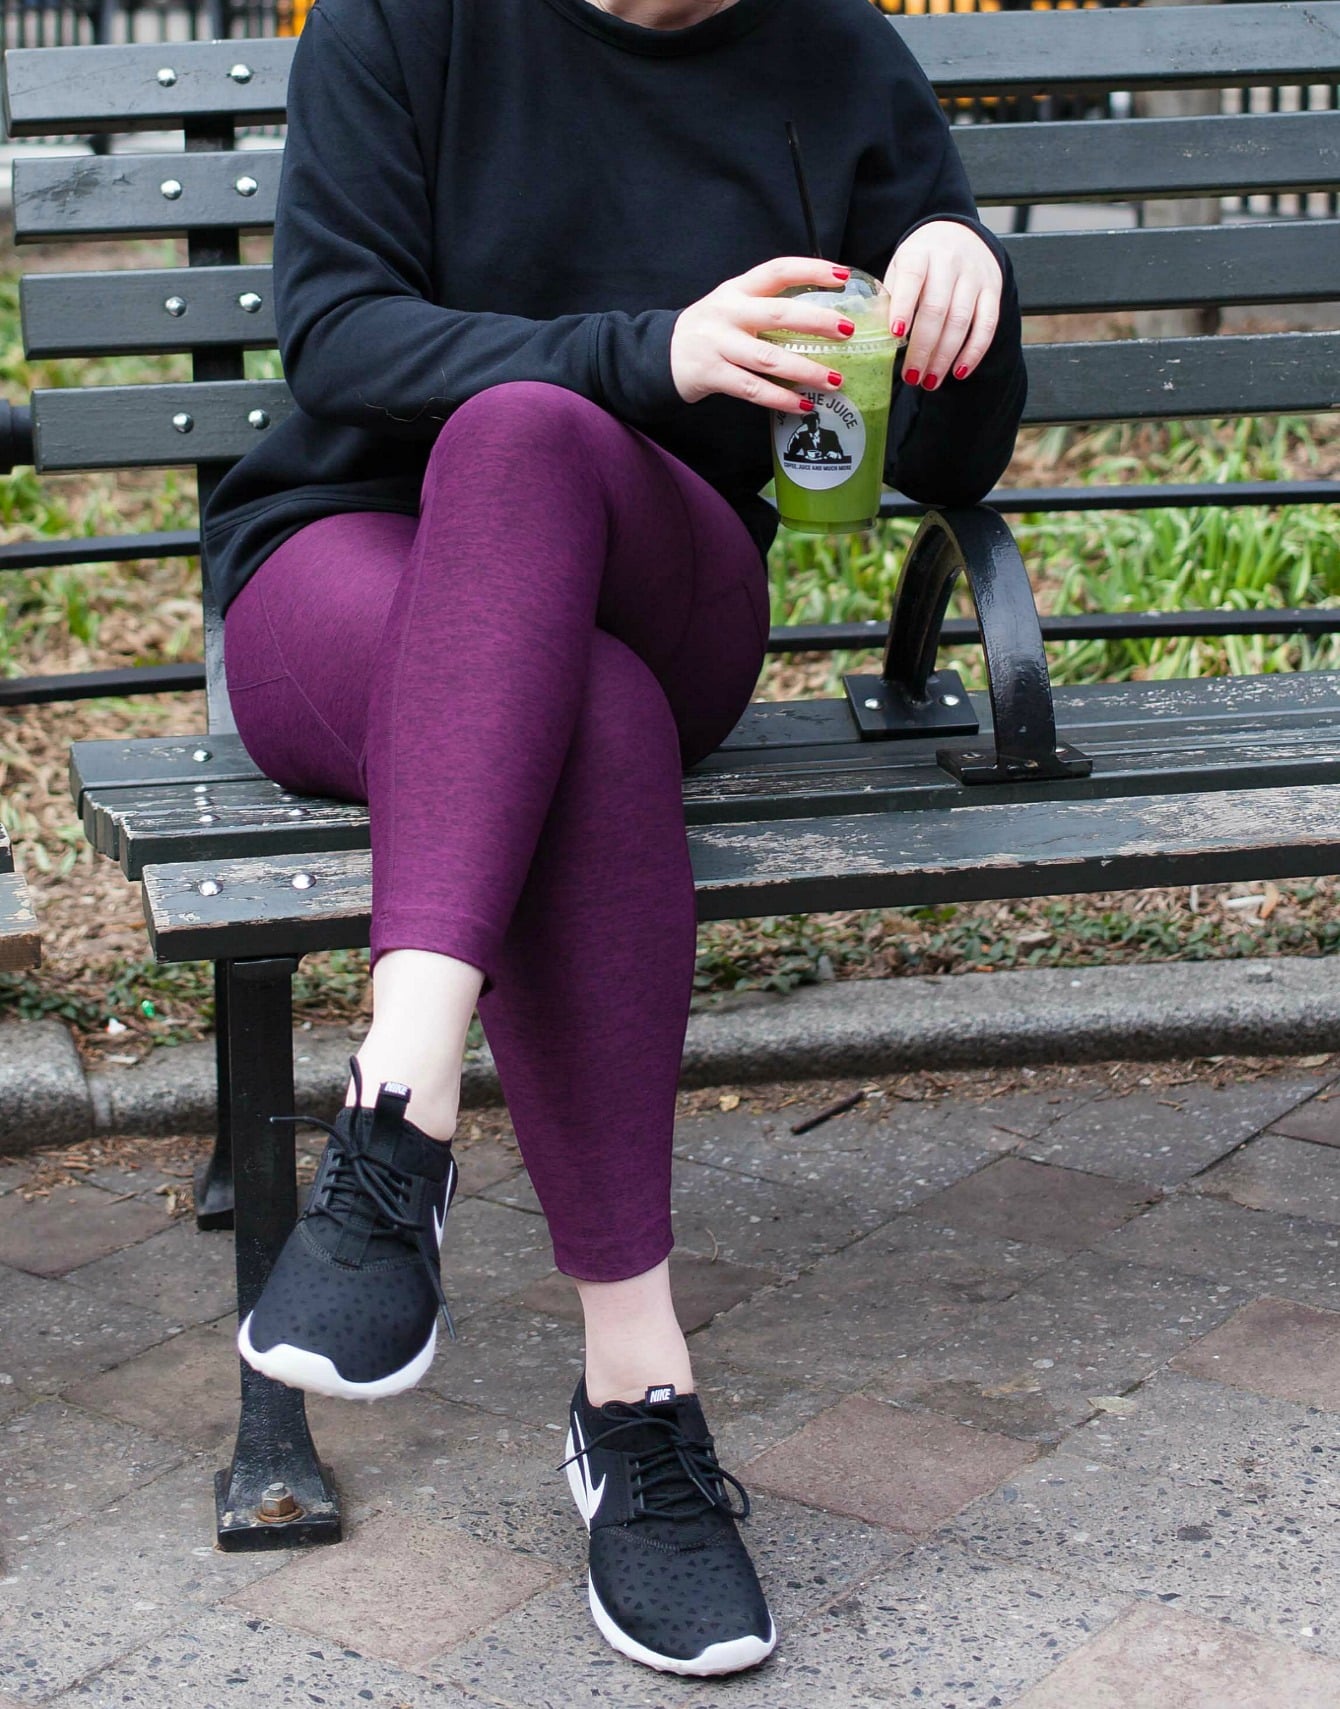 outdoor-voices-leggings - wit & whimsy